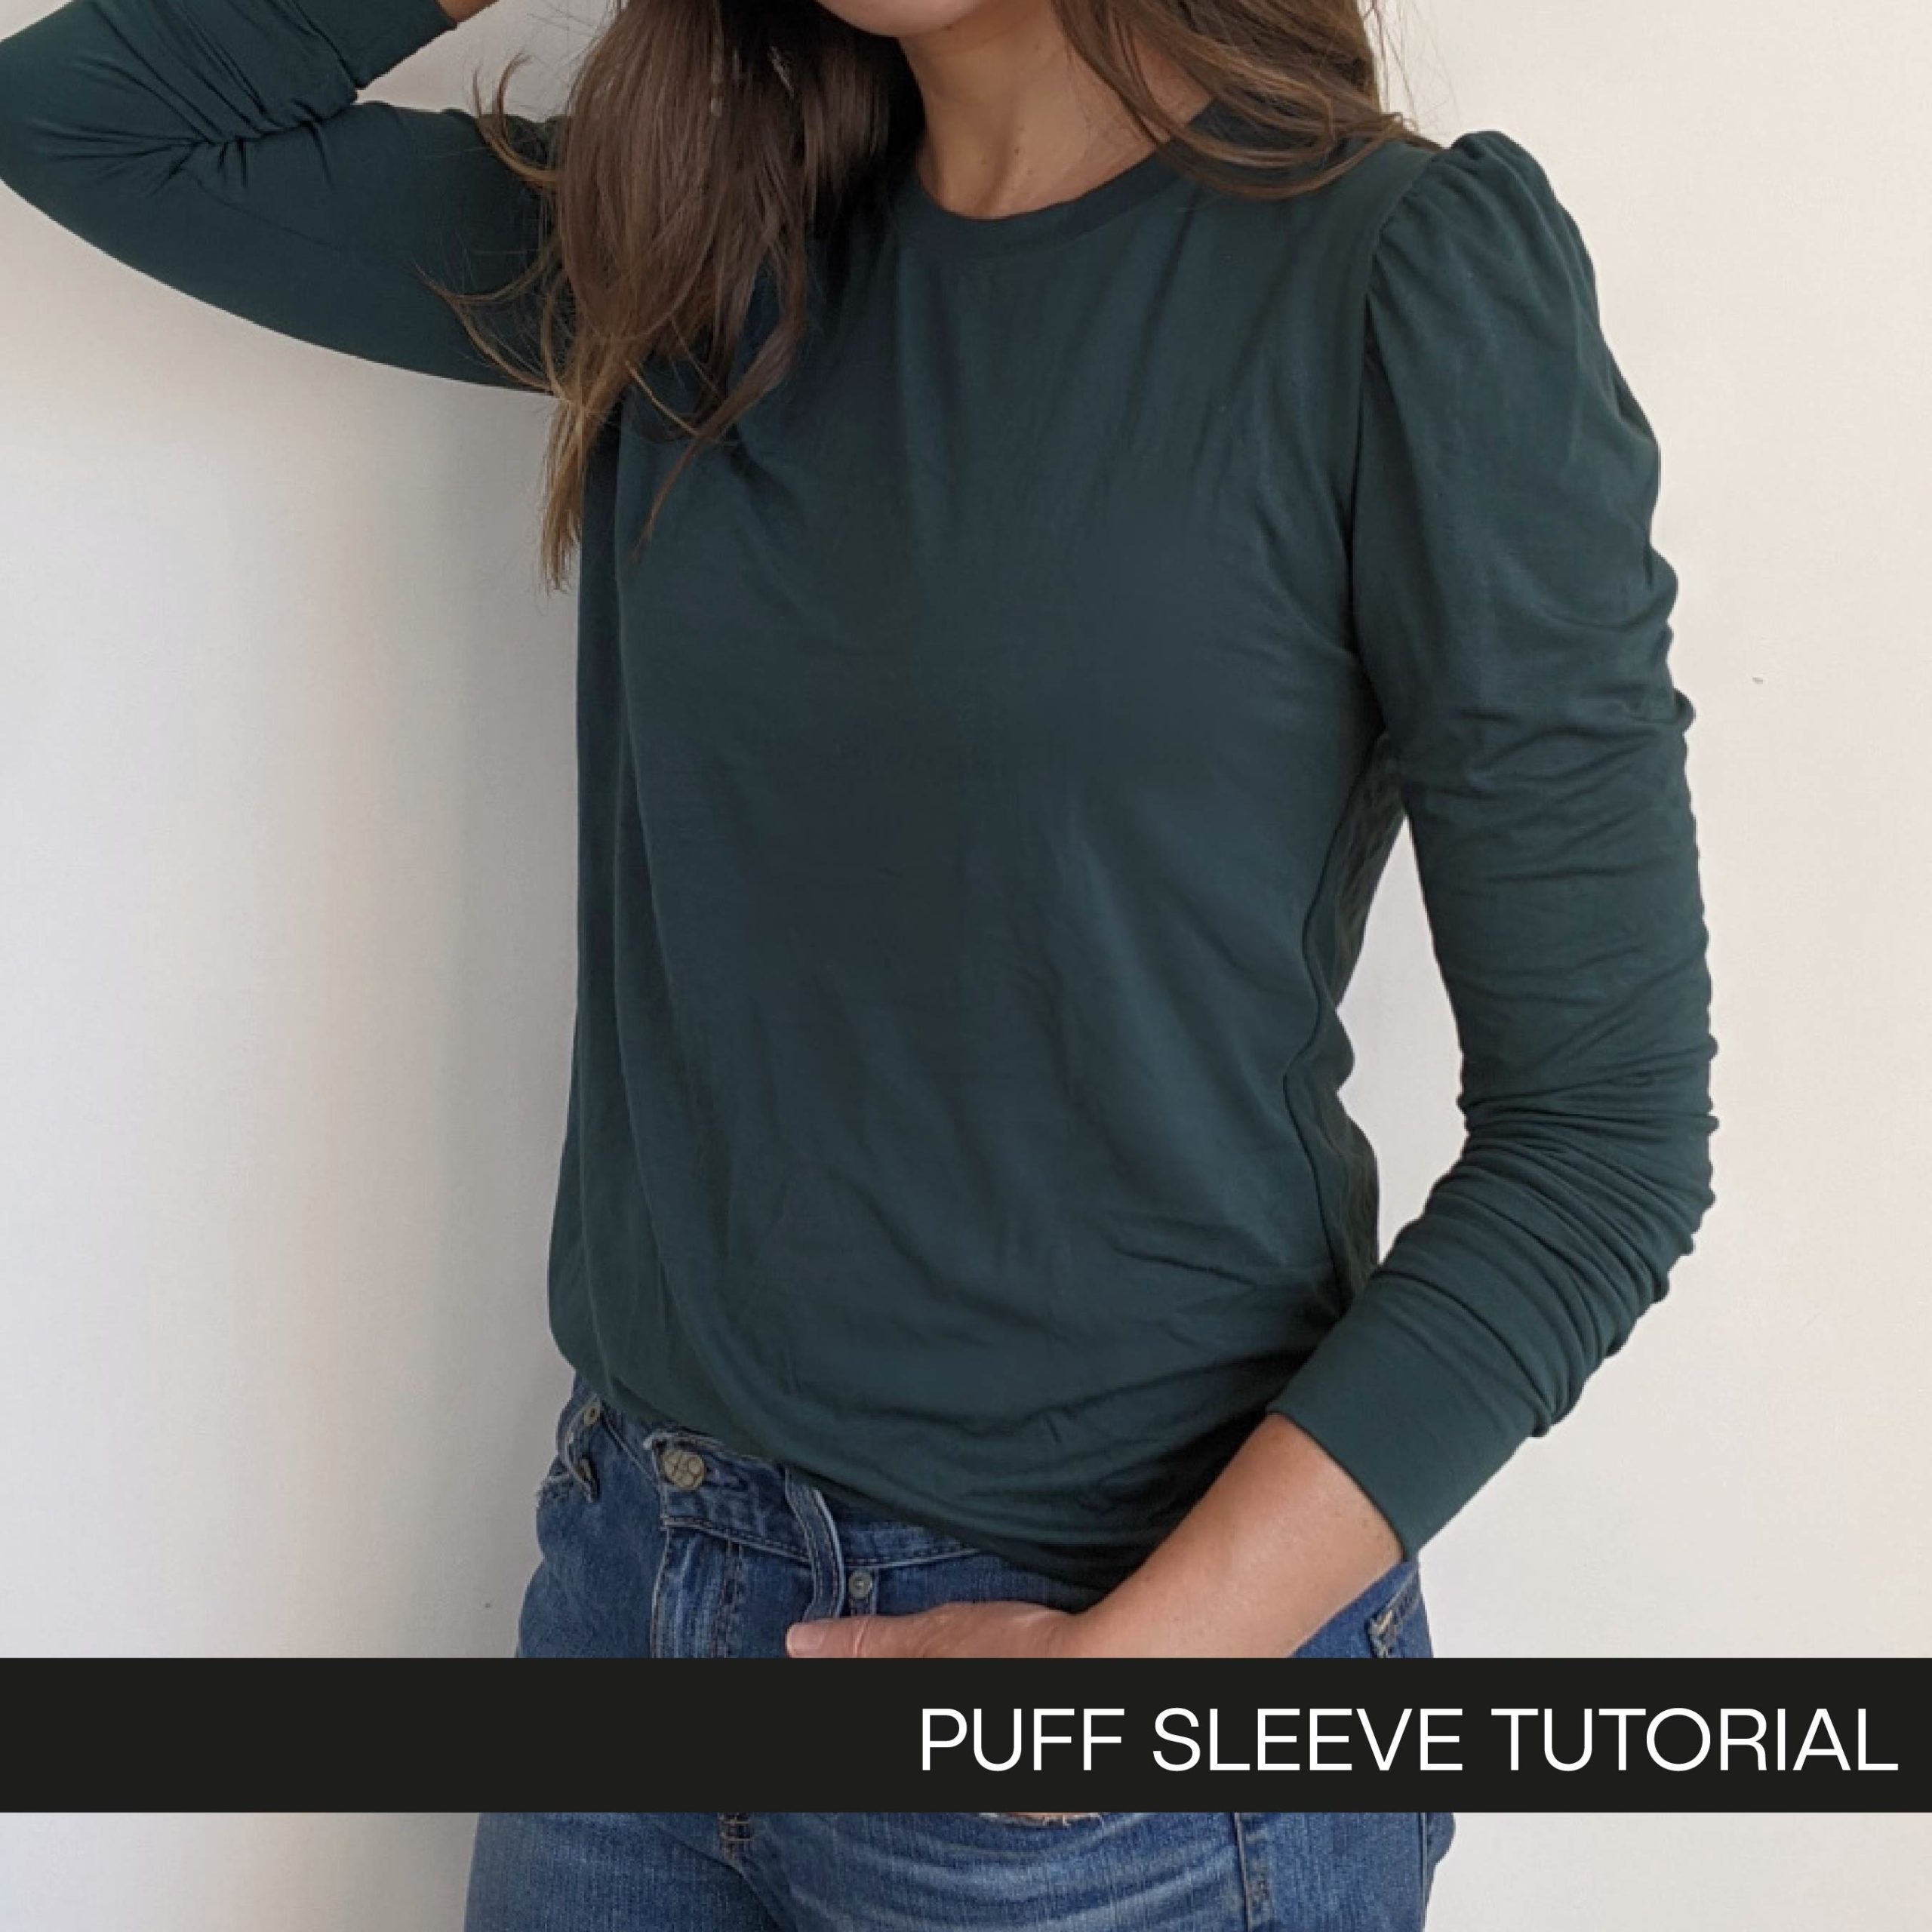 Banded Puff Sleeve Tutorial